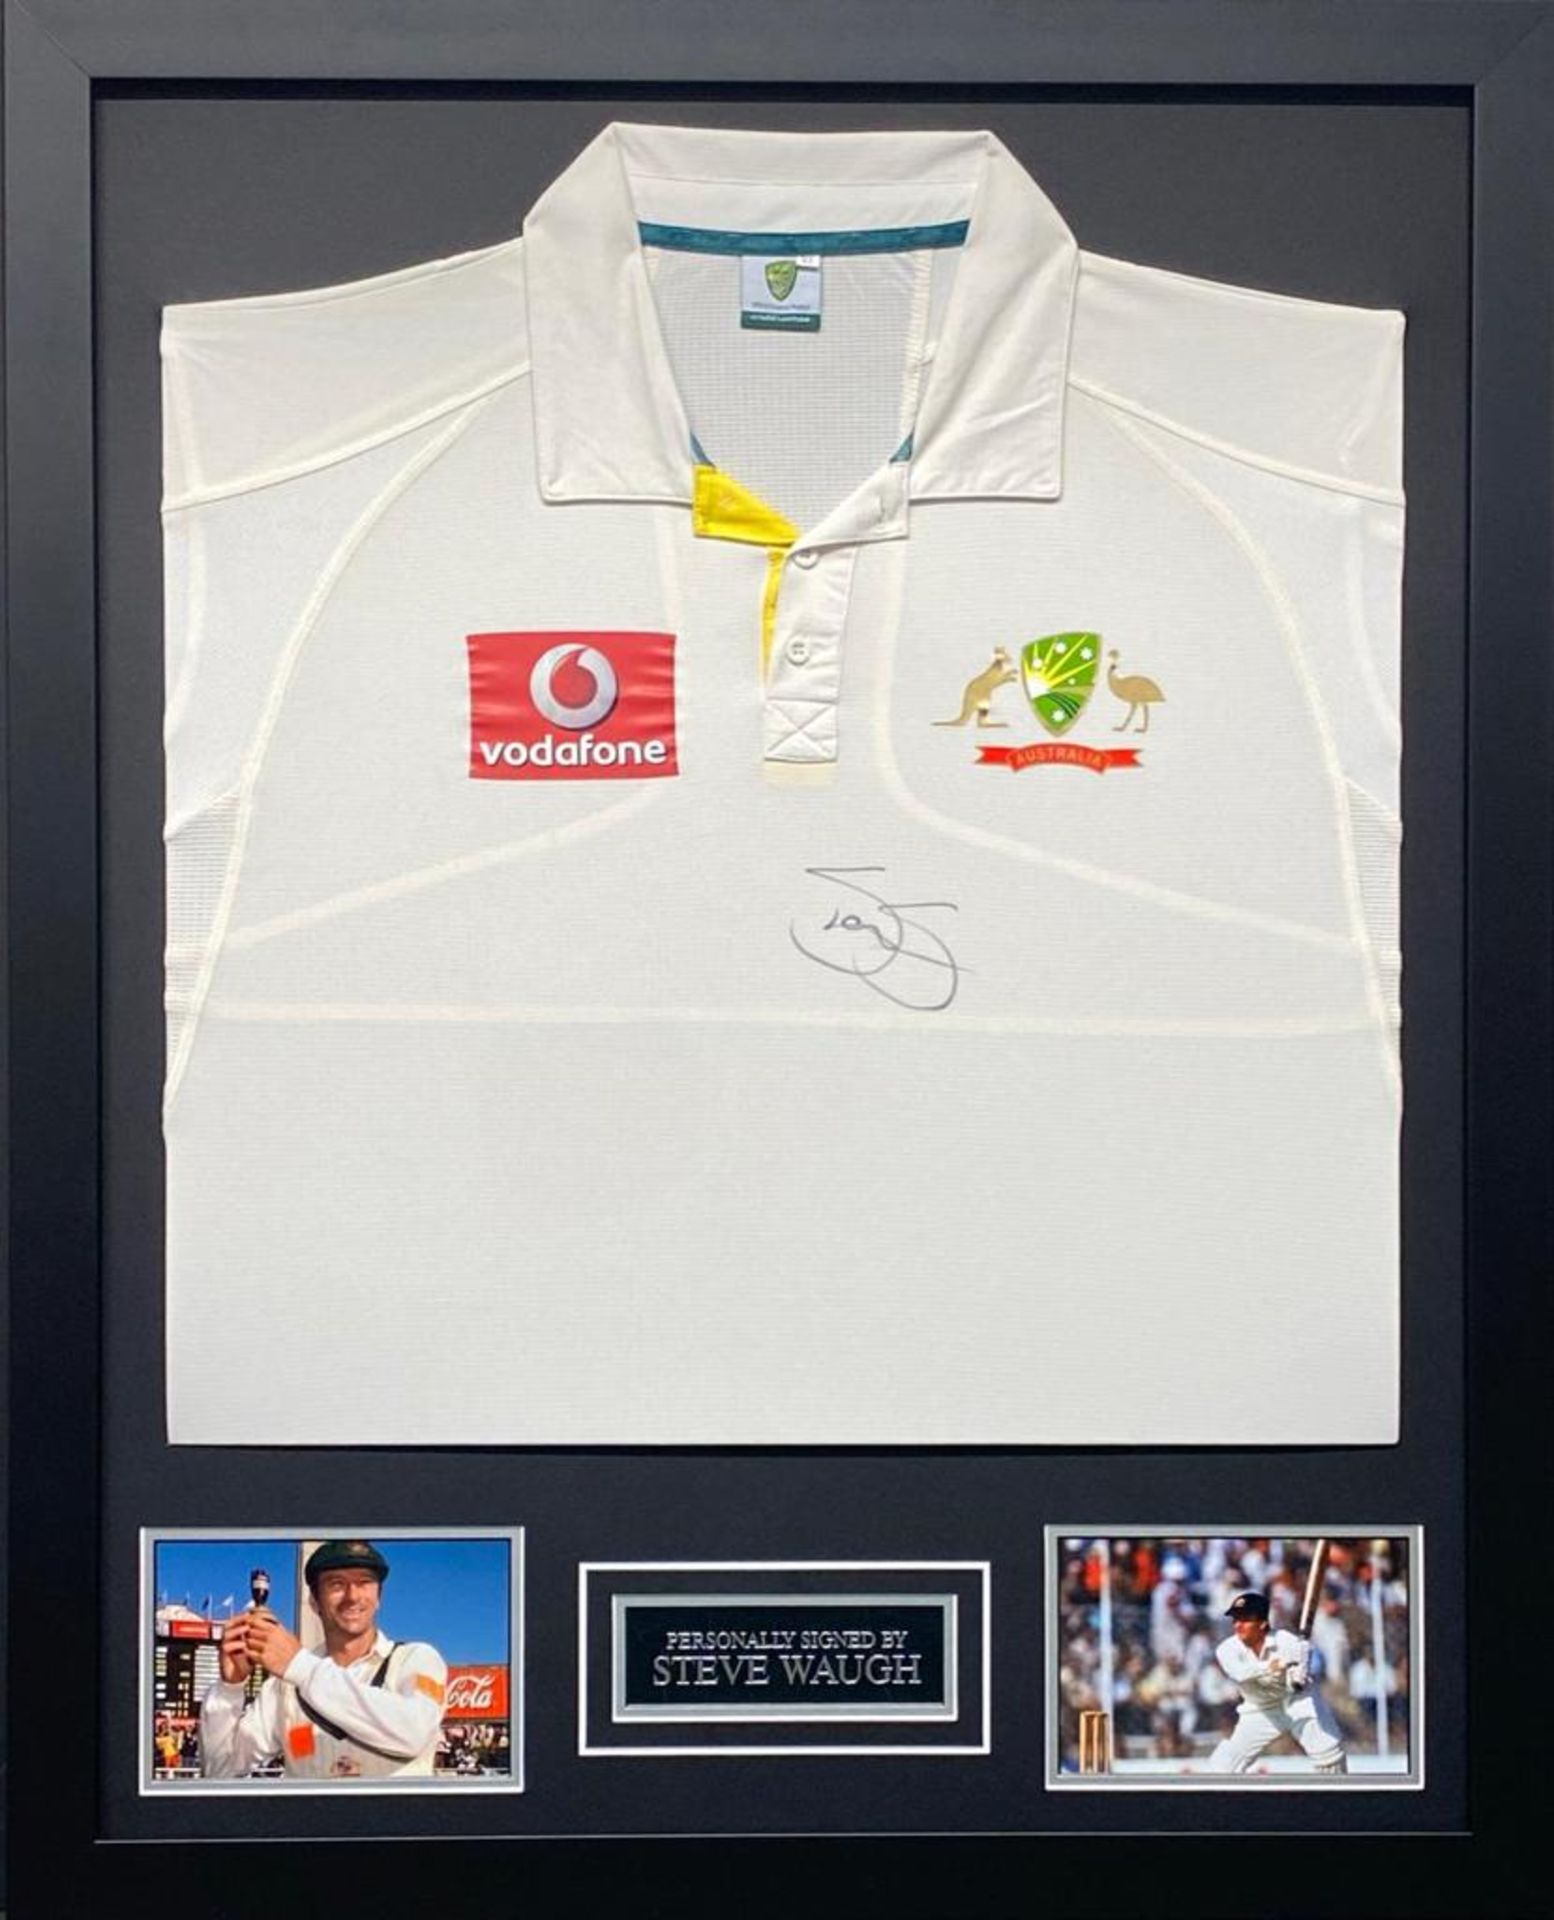 Steve Waugh Signed And Framed Australia Cricket Jersey Supplied with Certificate Of Authenticity